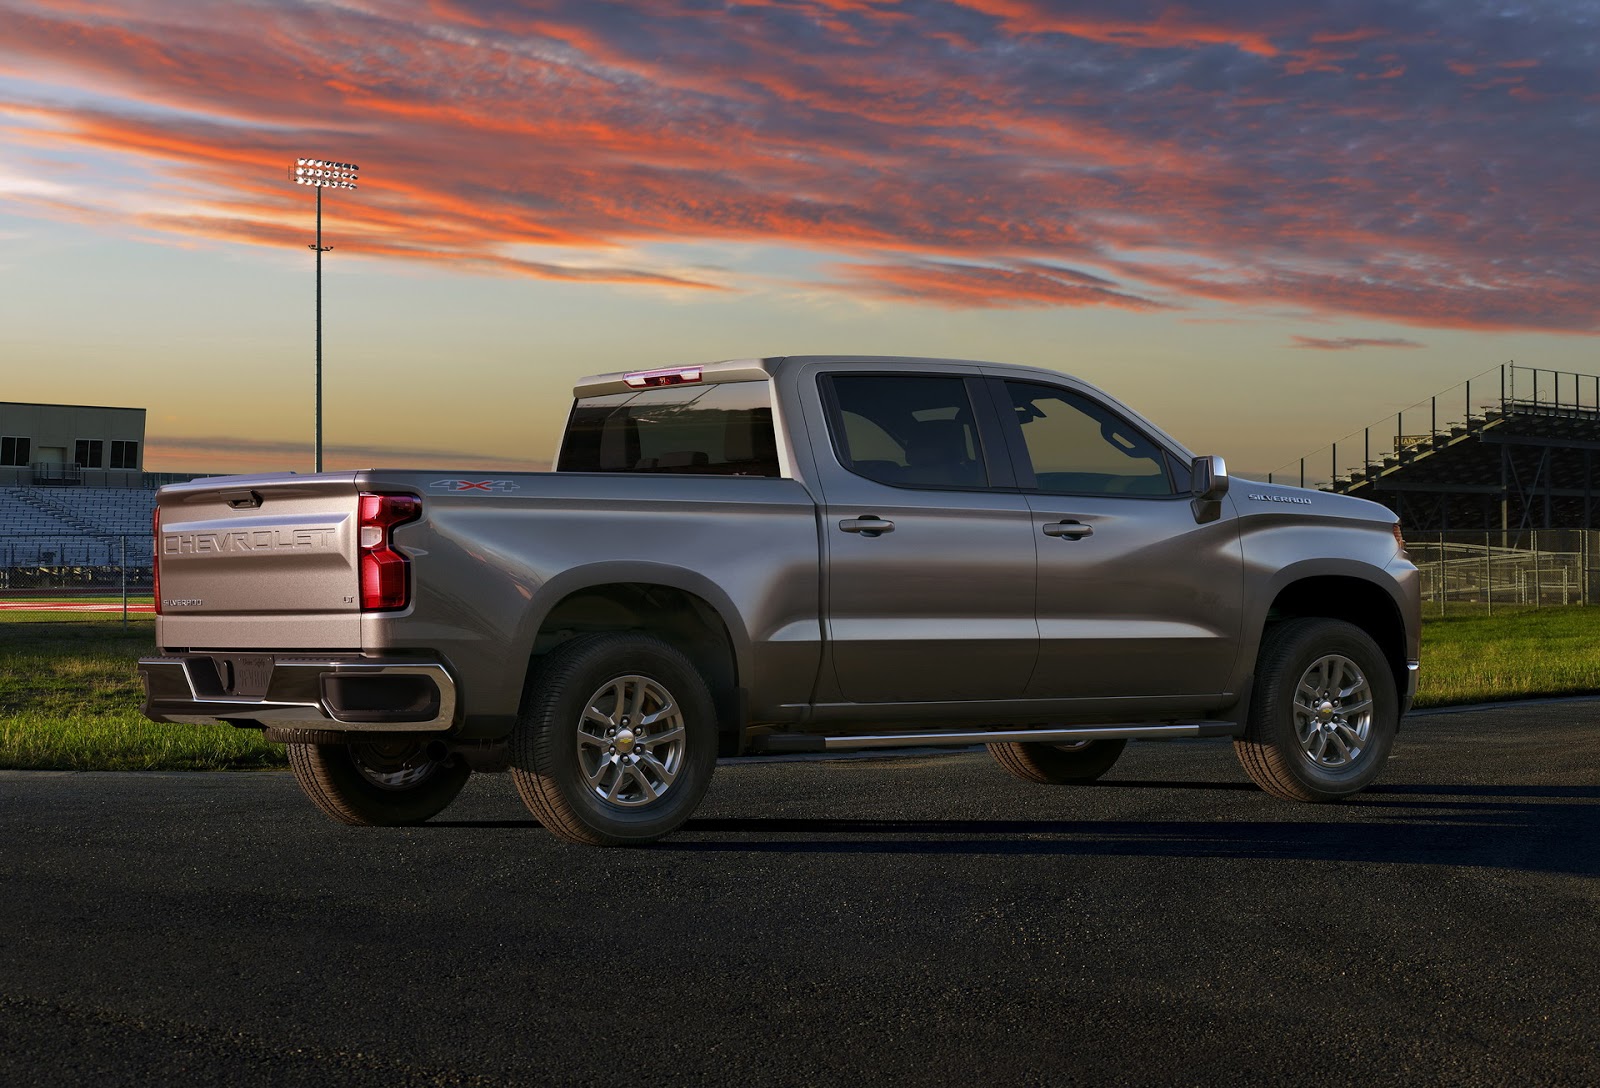 2019 Chevrolet Silverado Unveiled, Drops 450 Pounds, Gains StraightSix Diesel  Carscoops